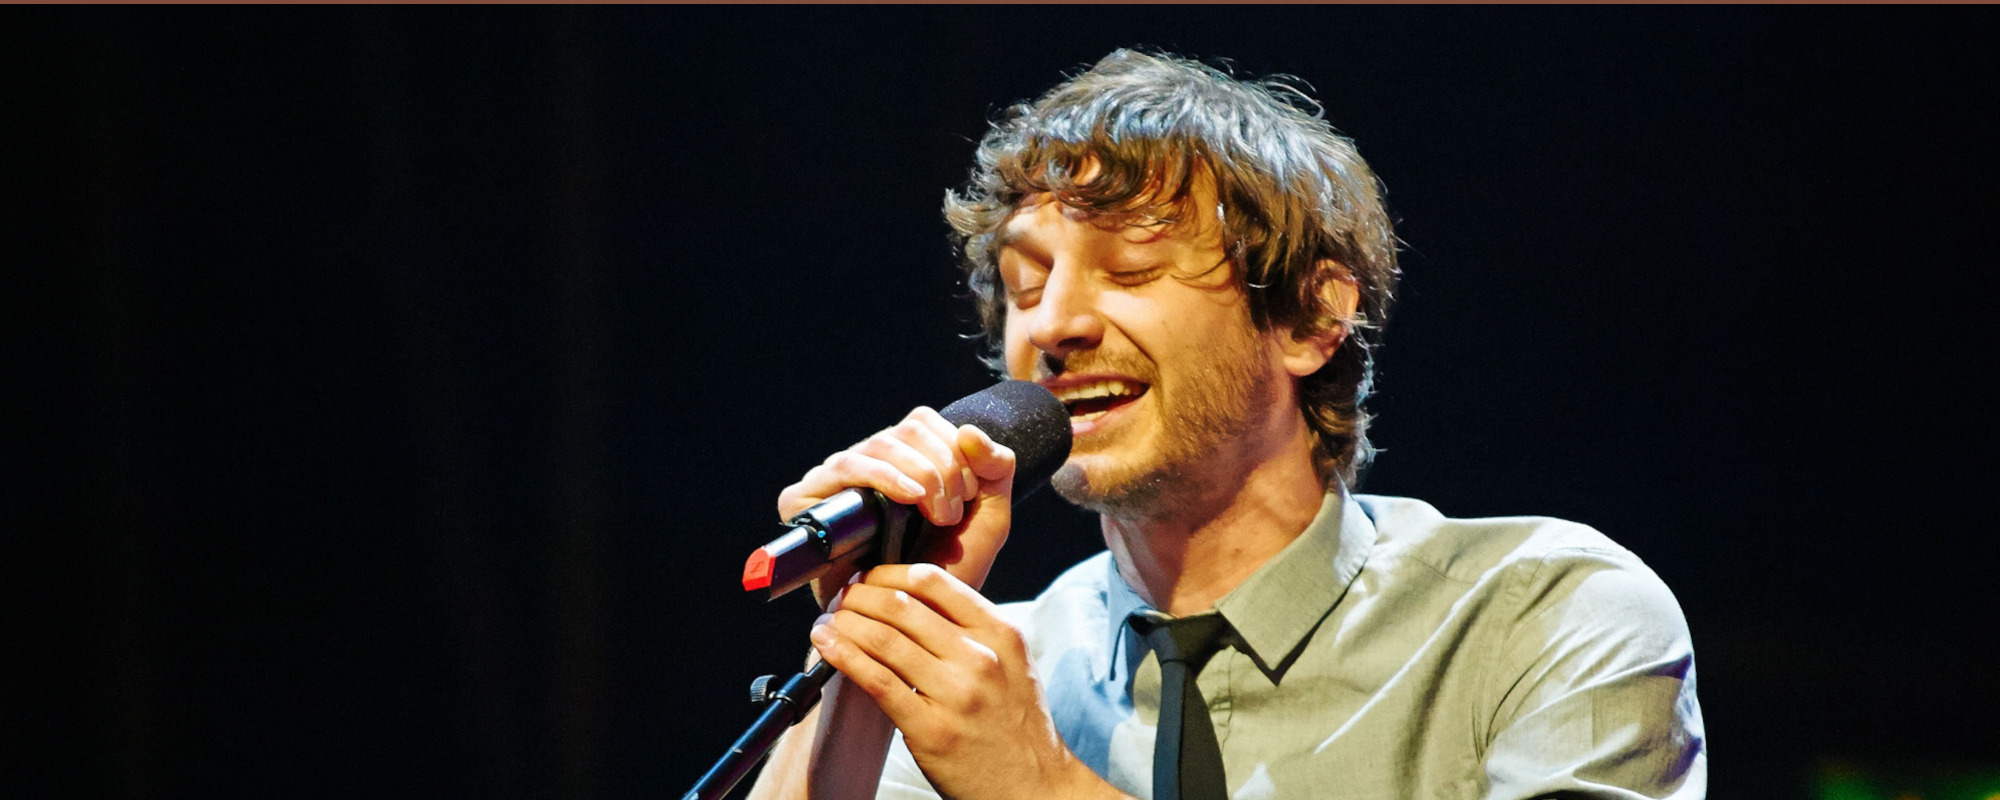 Behind the History and Meaning of the Song “Somebody That I Used To Know” by Gotye